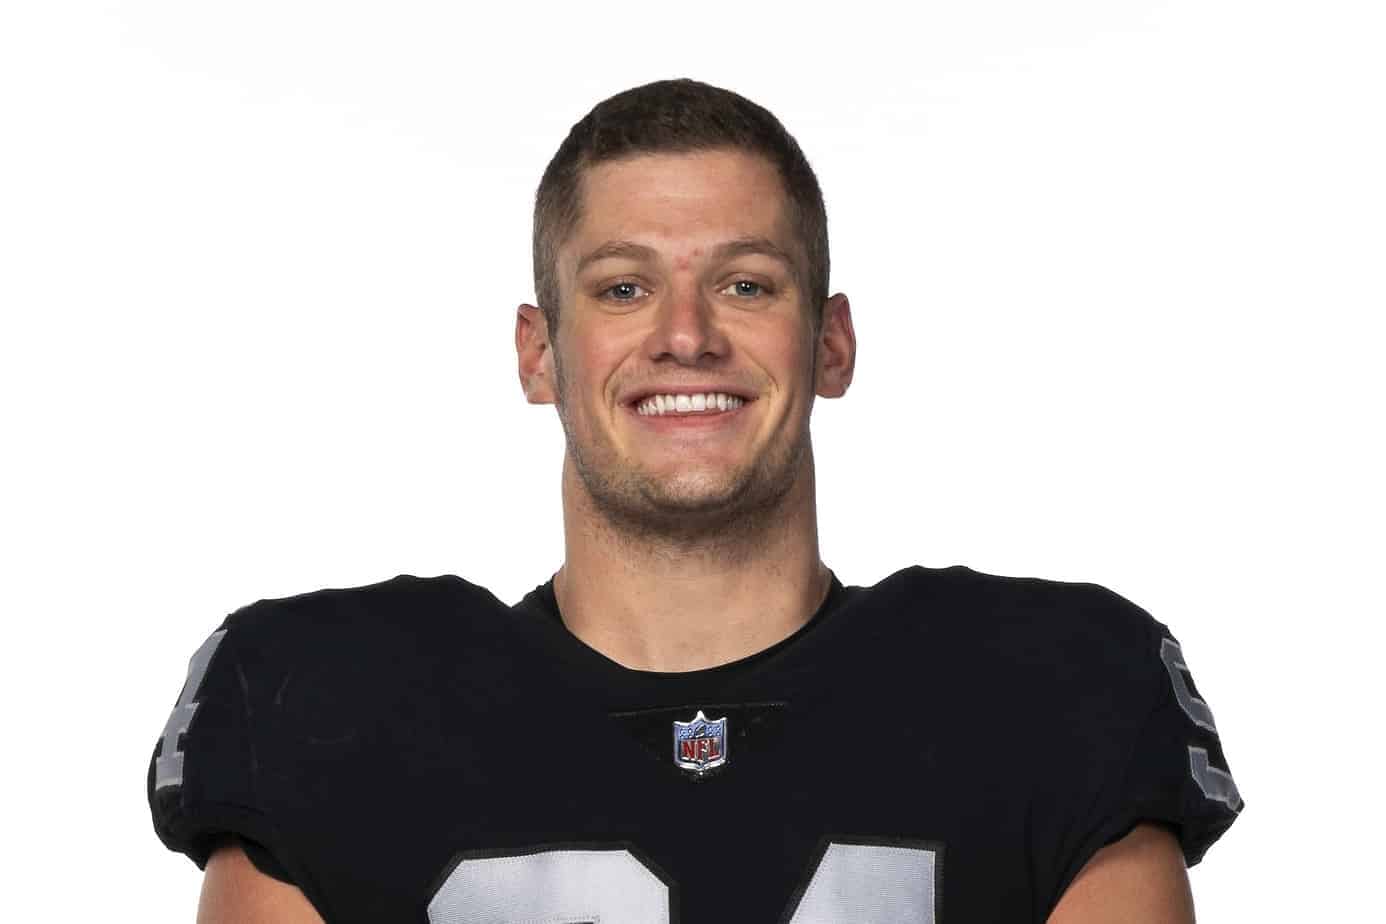 Las Vegas Raiders defensive end is now seeing his jerseys fly off the racks after making the announcement that he's gay on Monday